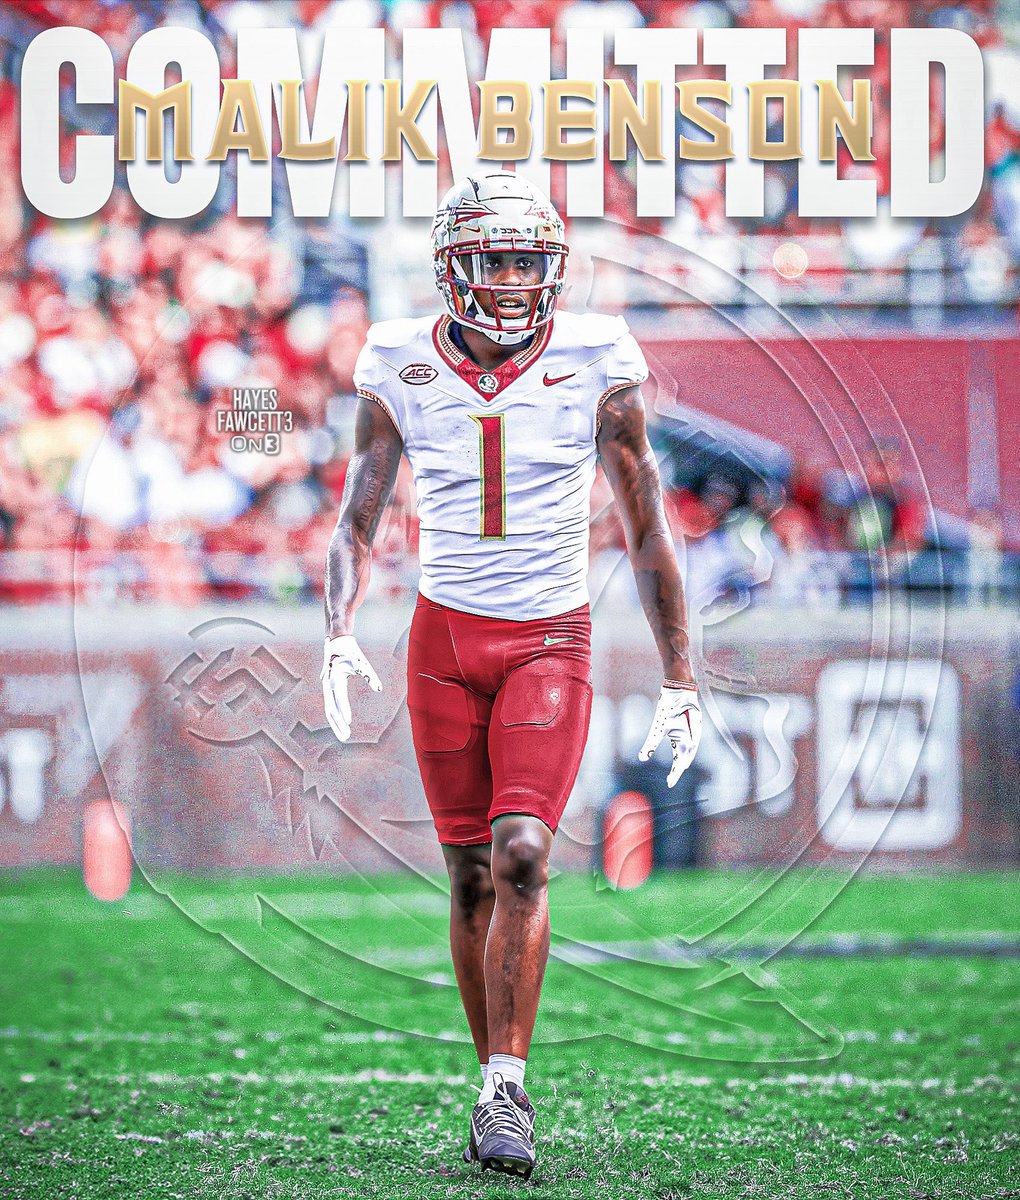 BREAKING: Former Alabama WR Malik Benson has Committed to Florida State, he tells @on3sports The 6’1 195 WR was ranked as the No. 1 Player in JUCO before transferring to Alabama Will have 1 year of eligibility remaining on3.com/news/malik-ben…